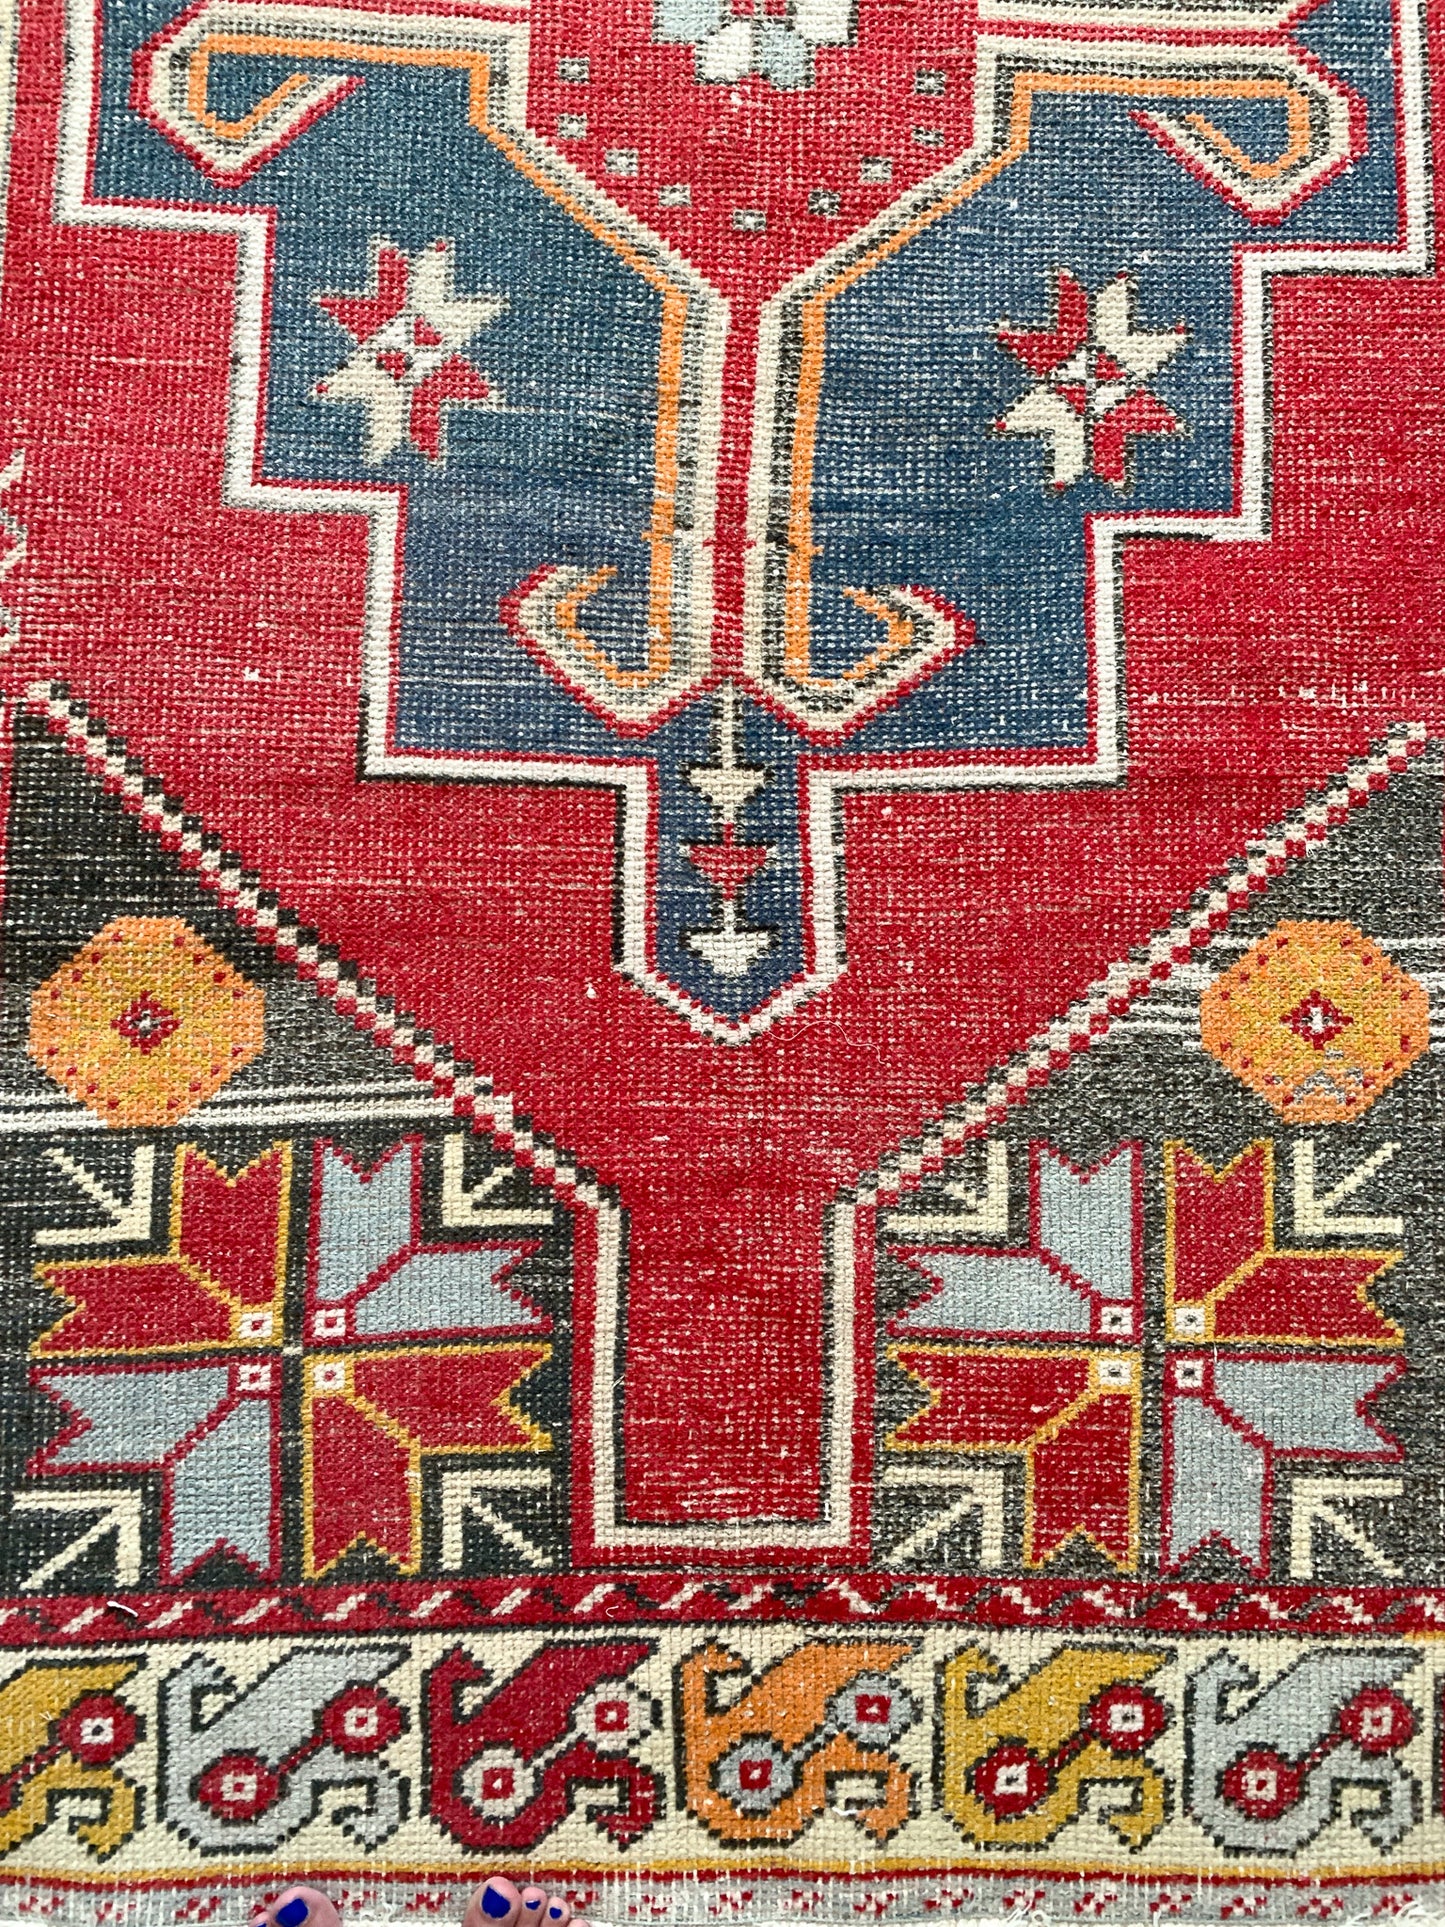 Reserved for Kathy - No. A1074 - 4.1' x 8.2' Vintage Turkish Area Rug